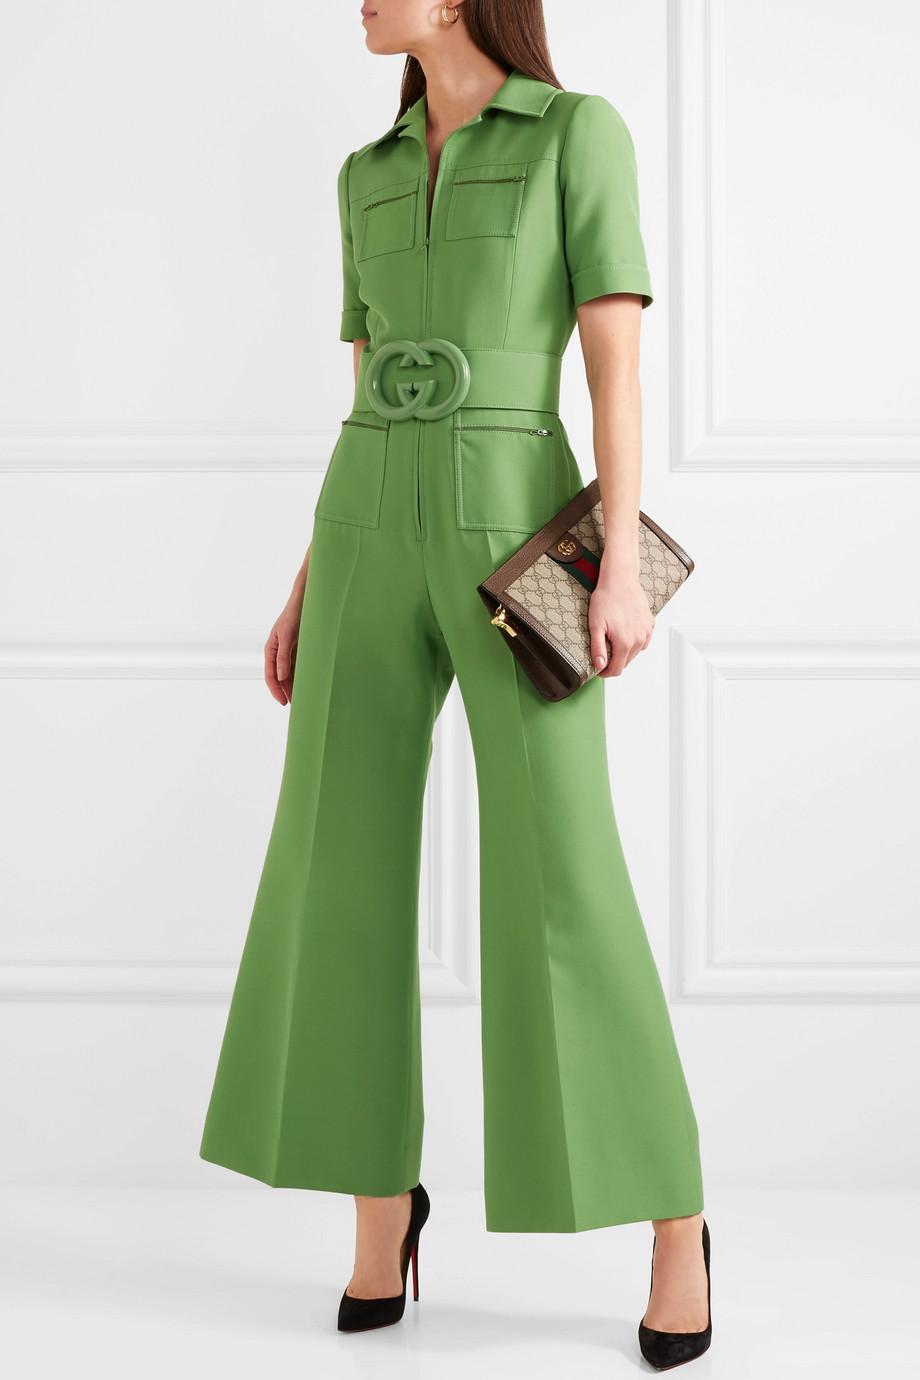 Great Outfits in Fashion History Rowan Blanchard in That Green Gucci  Jumpsuit  Fashionista